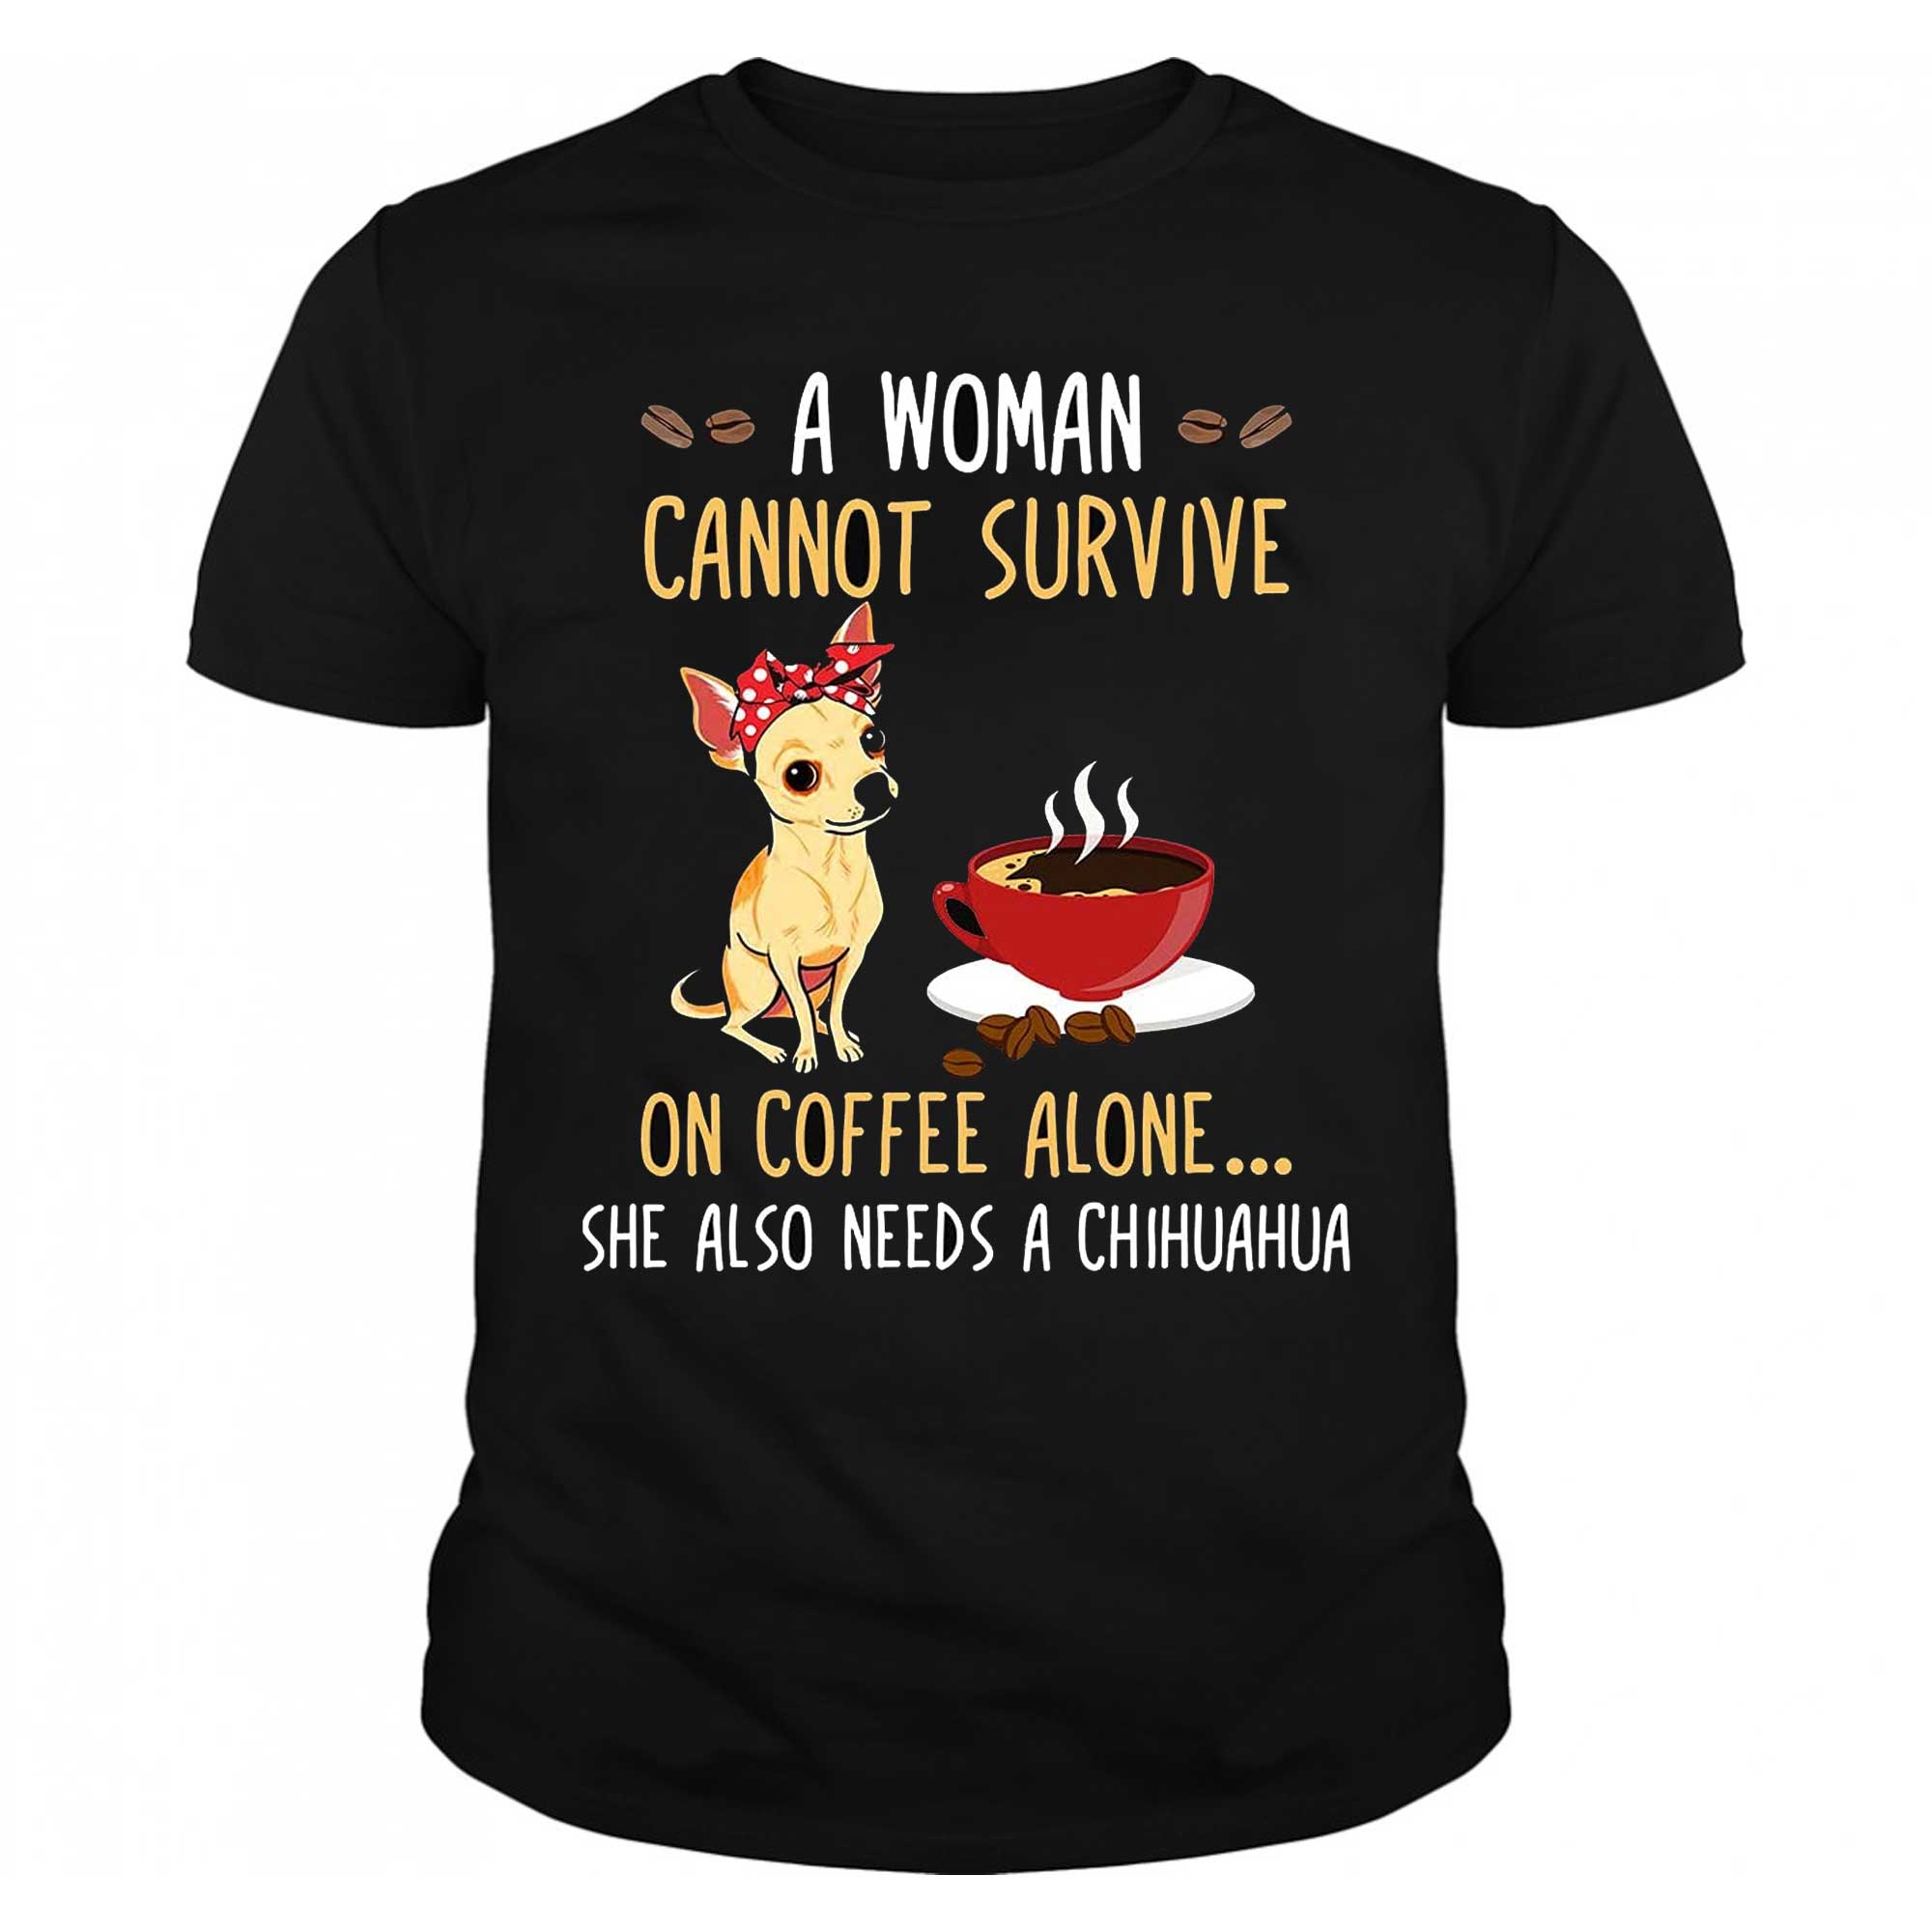 Skitongift-Chihuahua-And-Coffee-A-Woman-Cannot-Survive-On-Coffee-Alone-She-Also-Needs-A-Chihuahua-Gifts-Funny-Shirts-Hoodie